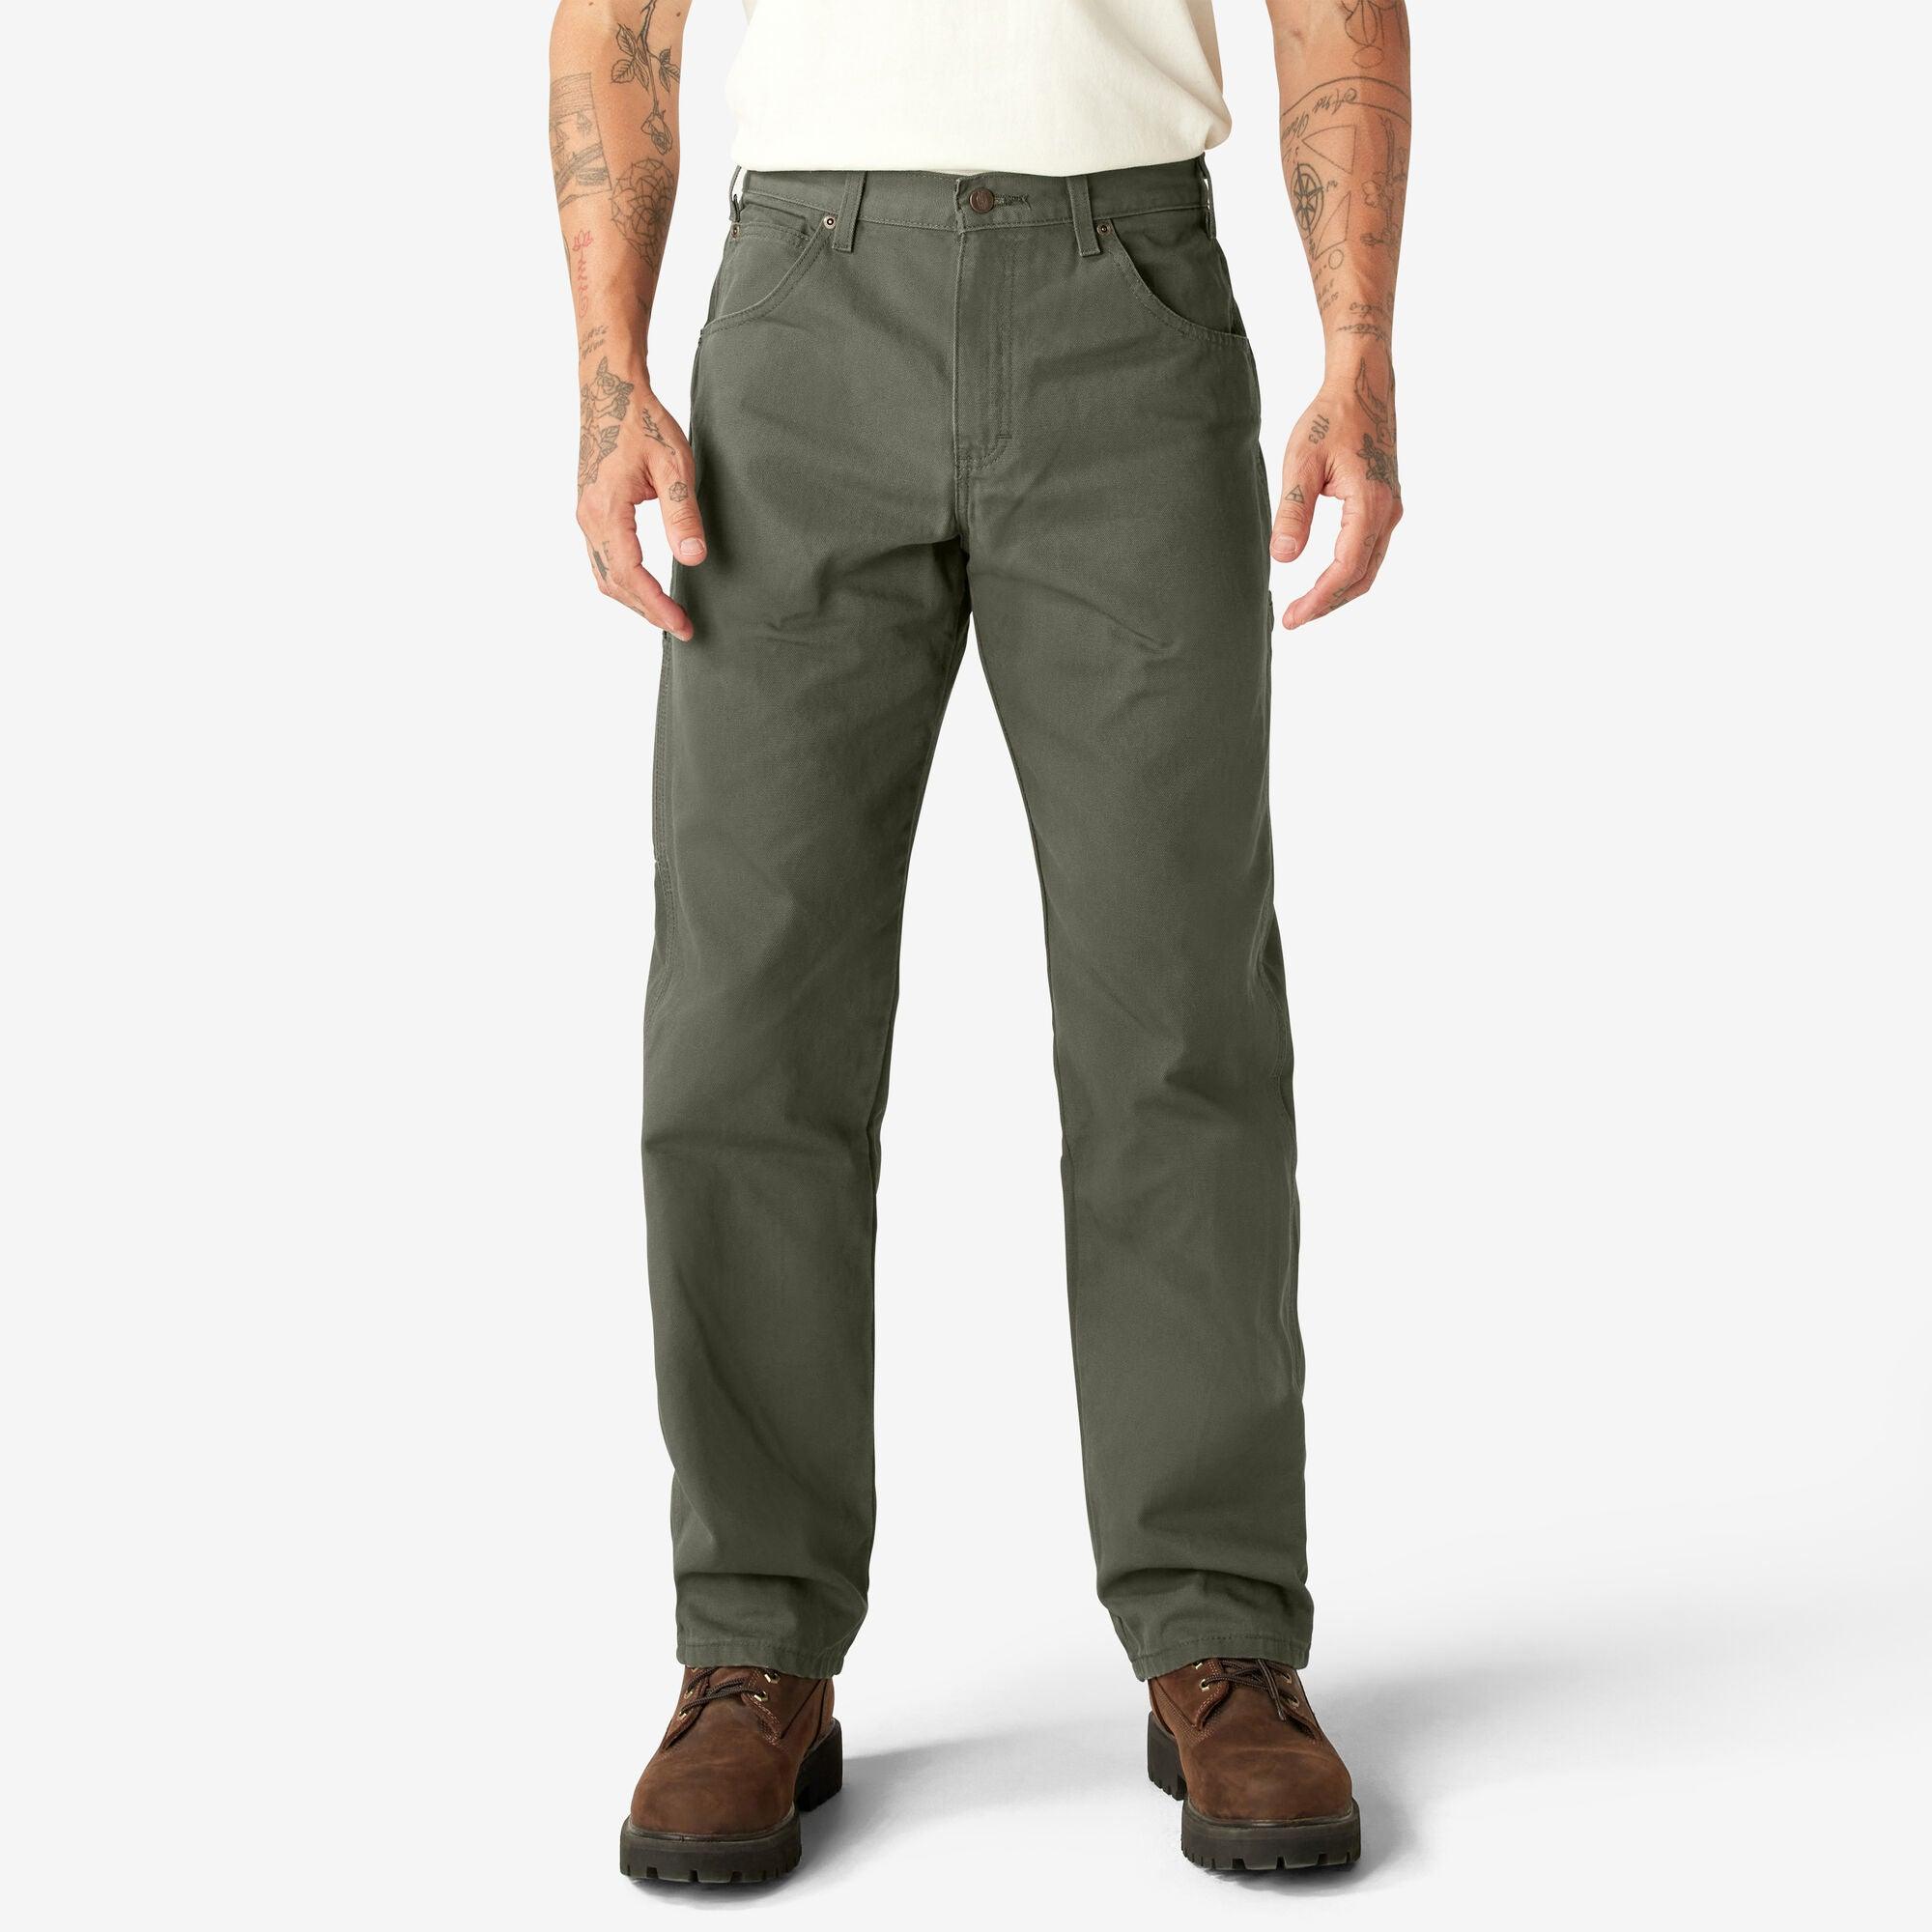 Relaxed Fit Heavyweight Duck Carpenter Pants, Rinsed Moss Green - Purpose-Built / Home of the Trades